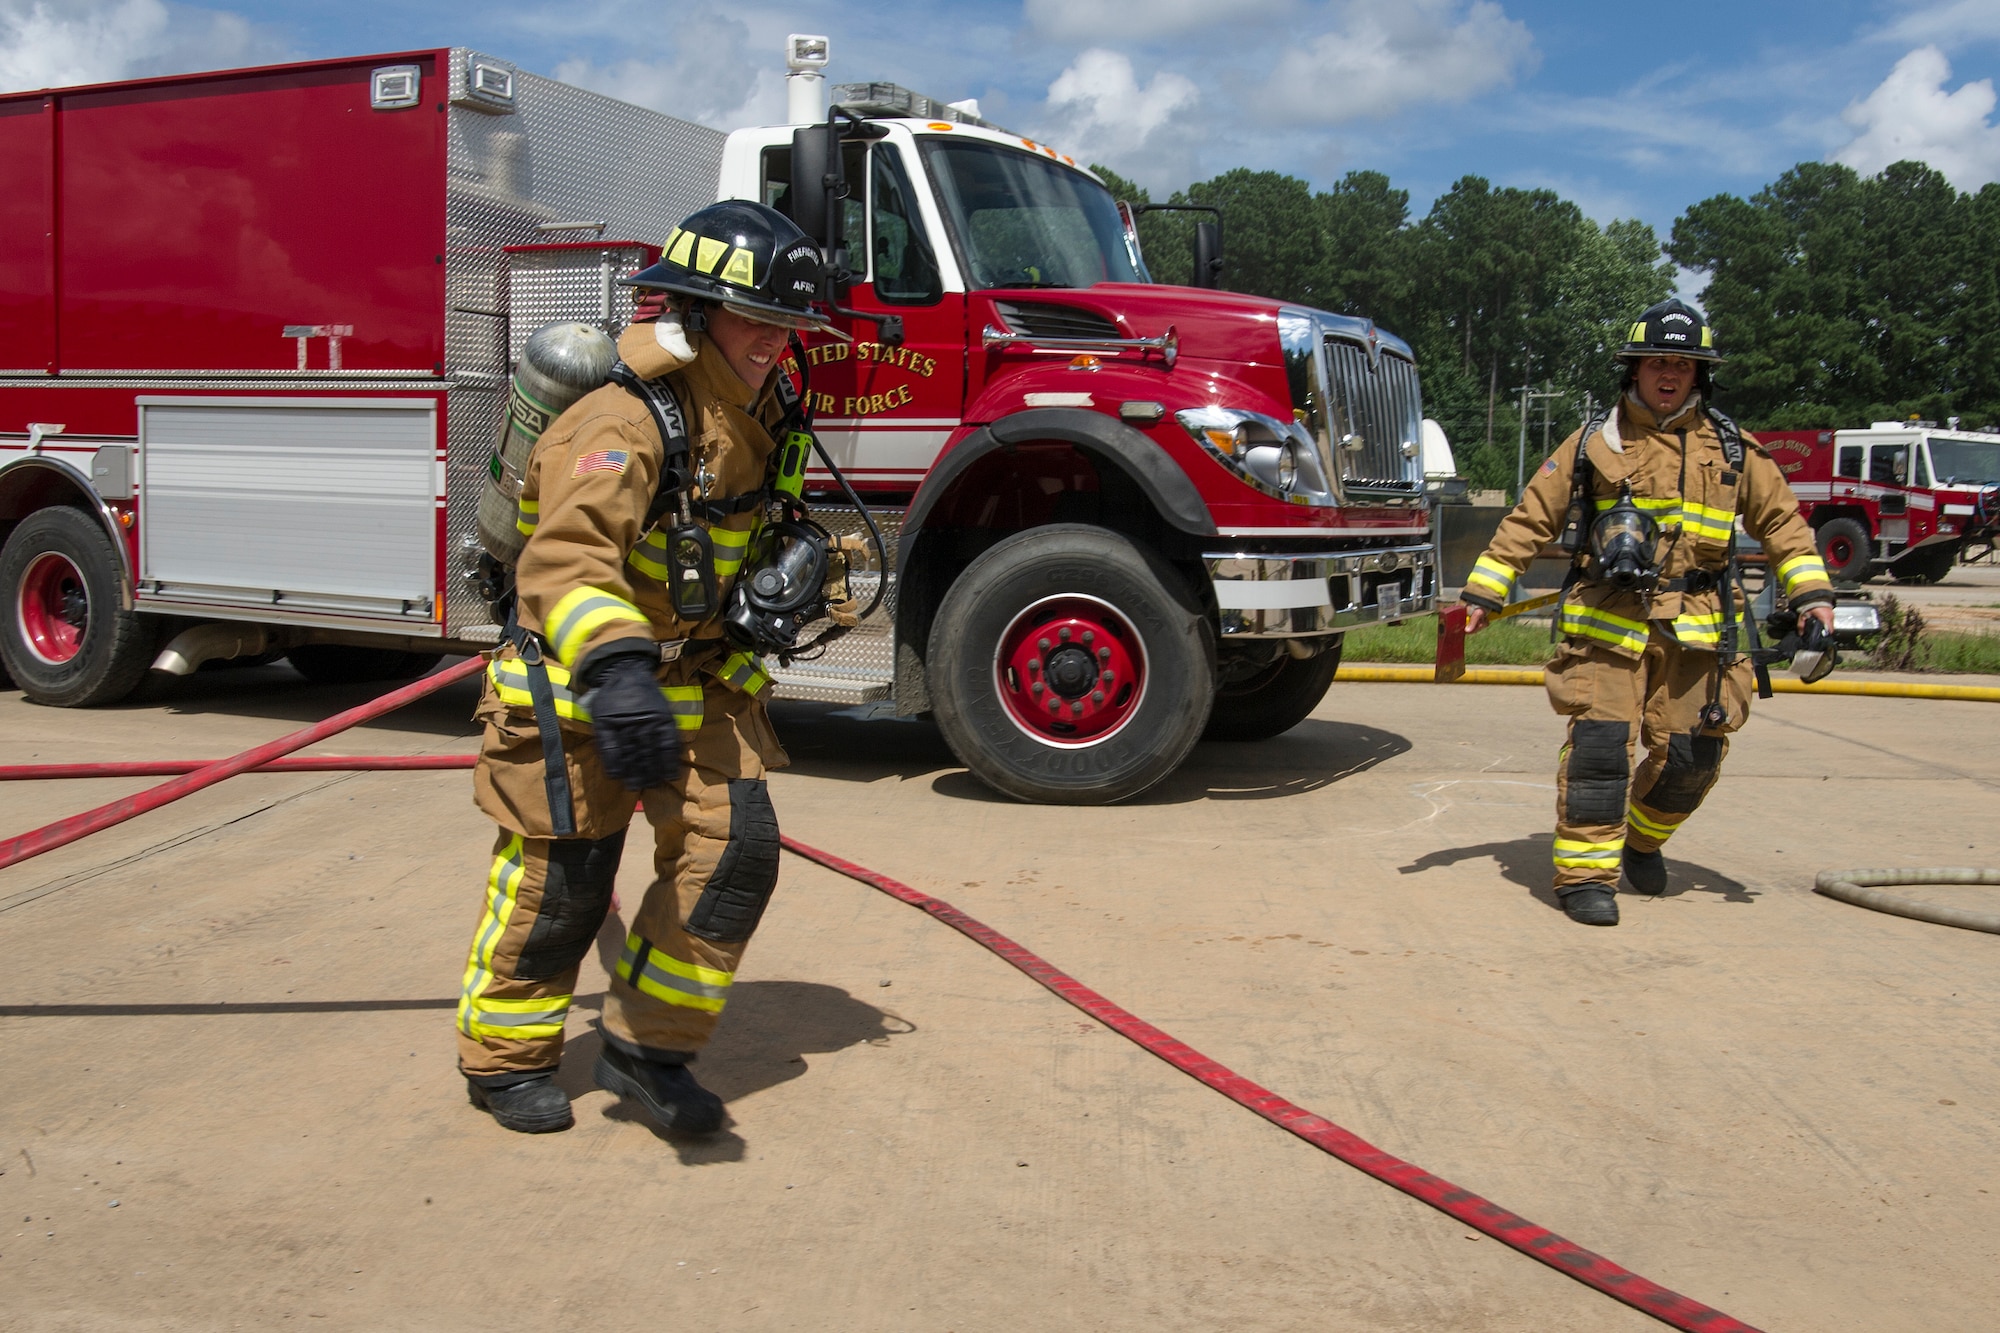 U.S. Air Force Senior Airman Brianna Senatore and Staff Sgt. Zachery Sodon both firefighters with the Air Force Reserve's 514th Civil Engineer Squadron from Joint Base McGuire-Dix-Lakehurst, New Jersey, respond to a simulated three-story building fire during Patriot Warrior at Dobbins Air Reserve Base, Georgia, Aug. 17, 2018. The Patriot Warrior exercise supports the Air Force Reserve guiding and foundational principles of preserving, building and shaping a combat ready, cost effective, experienced and sustainable professional military force. (U.S. Air Force photo by Master Sgt. Theanne Herrmann)